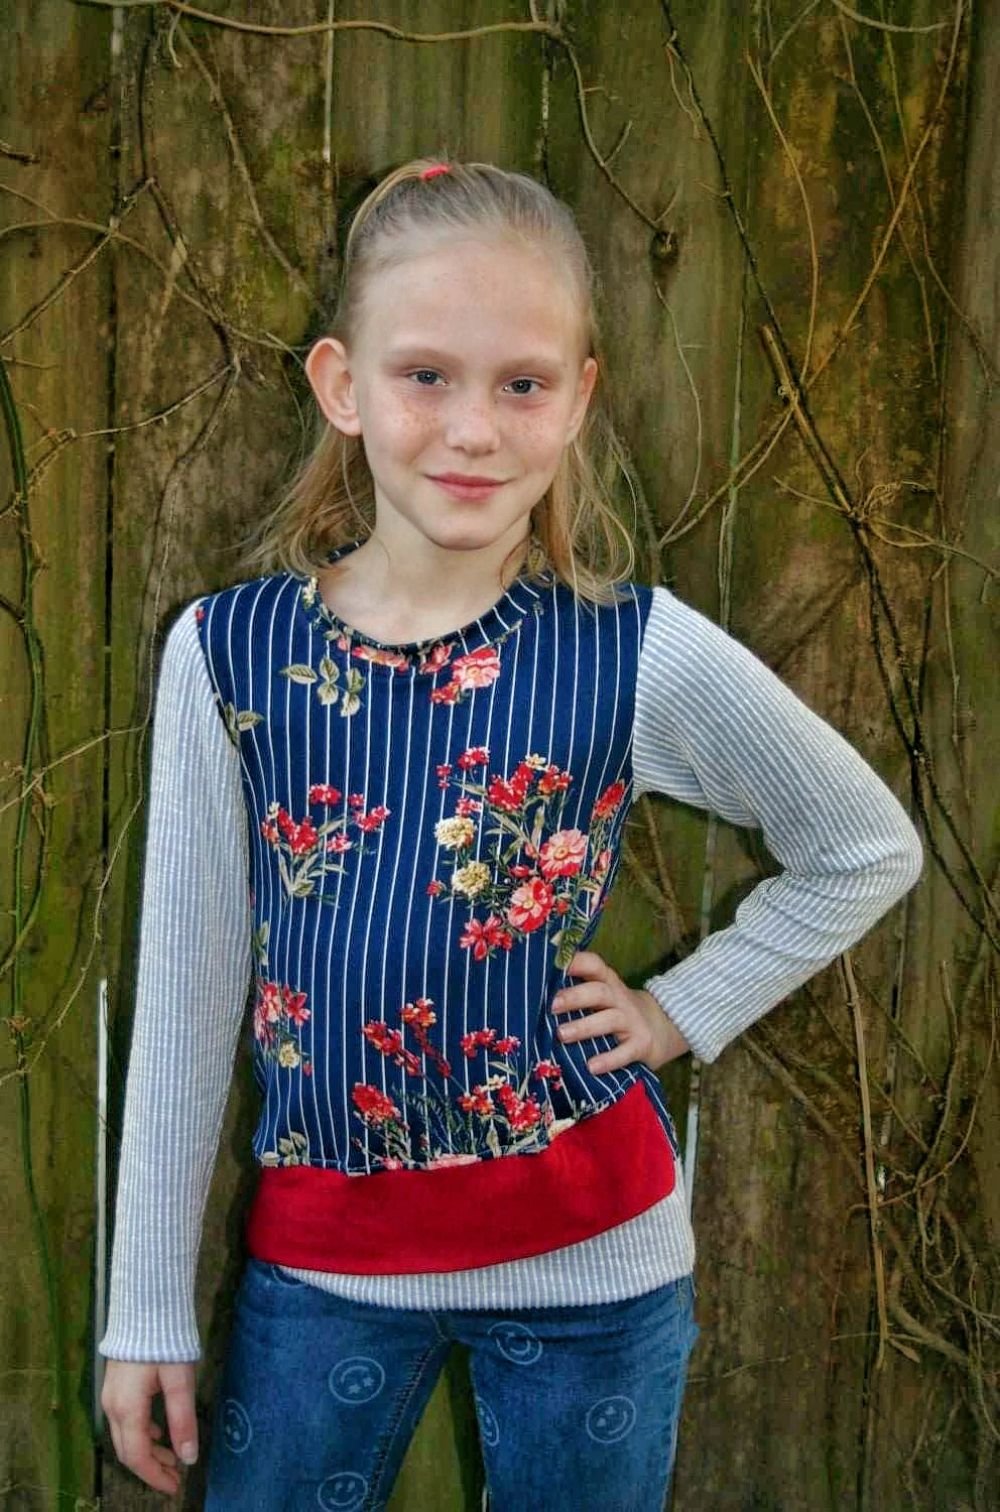 Madly's Asymmetrical Top Sizes 2T to 14 Kids and Dolls PDF Pattern